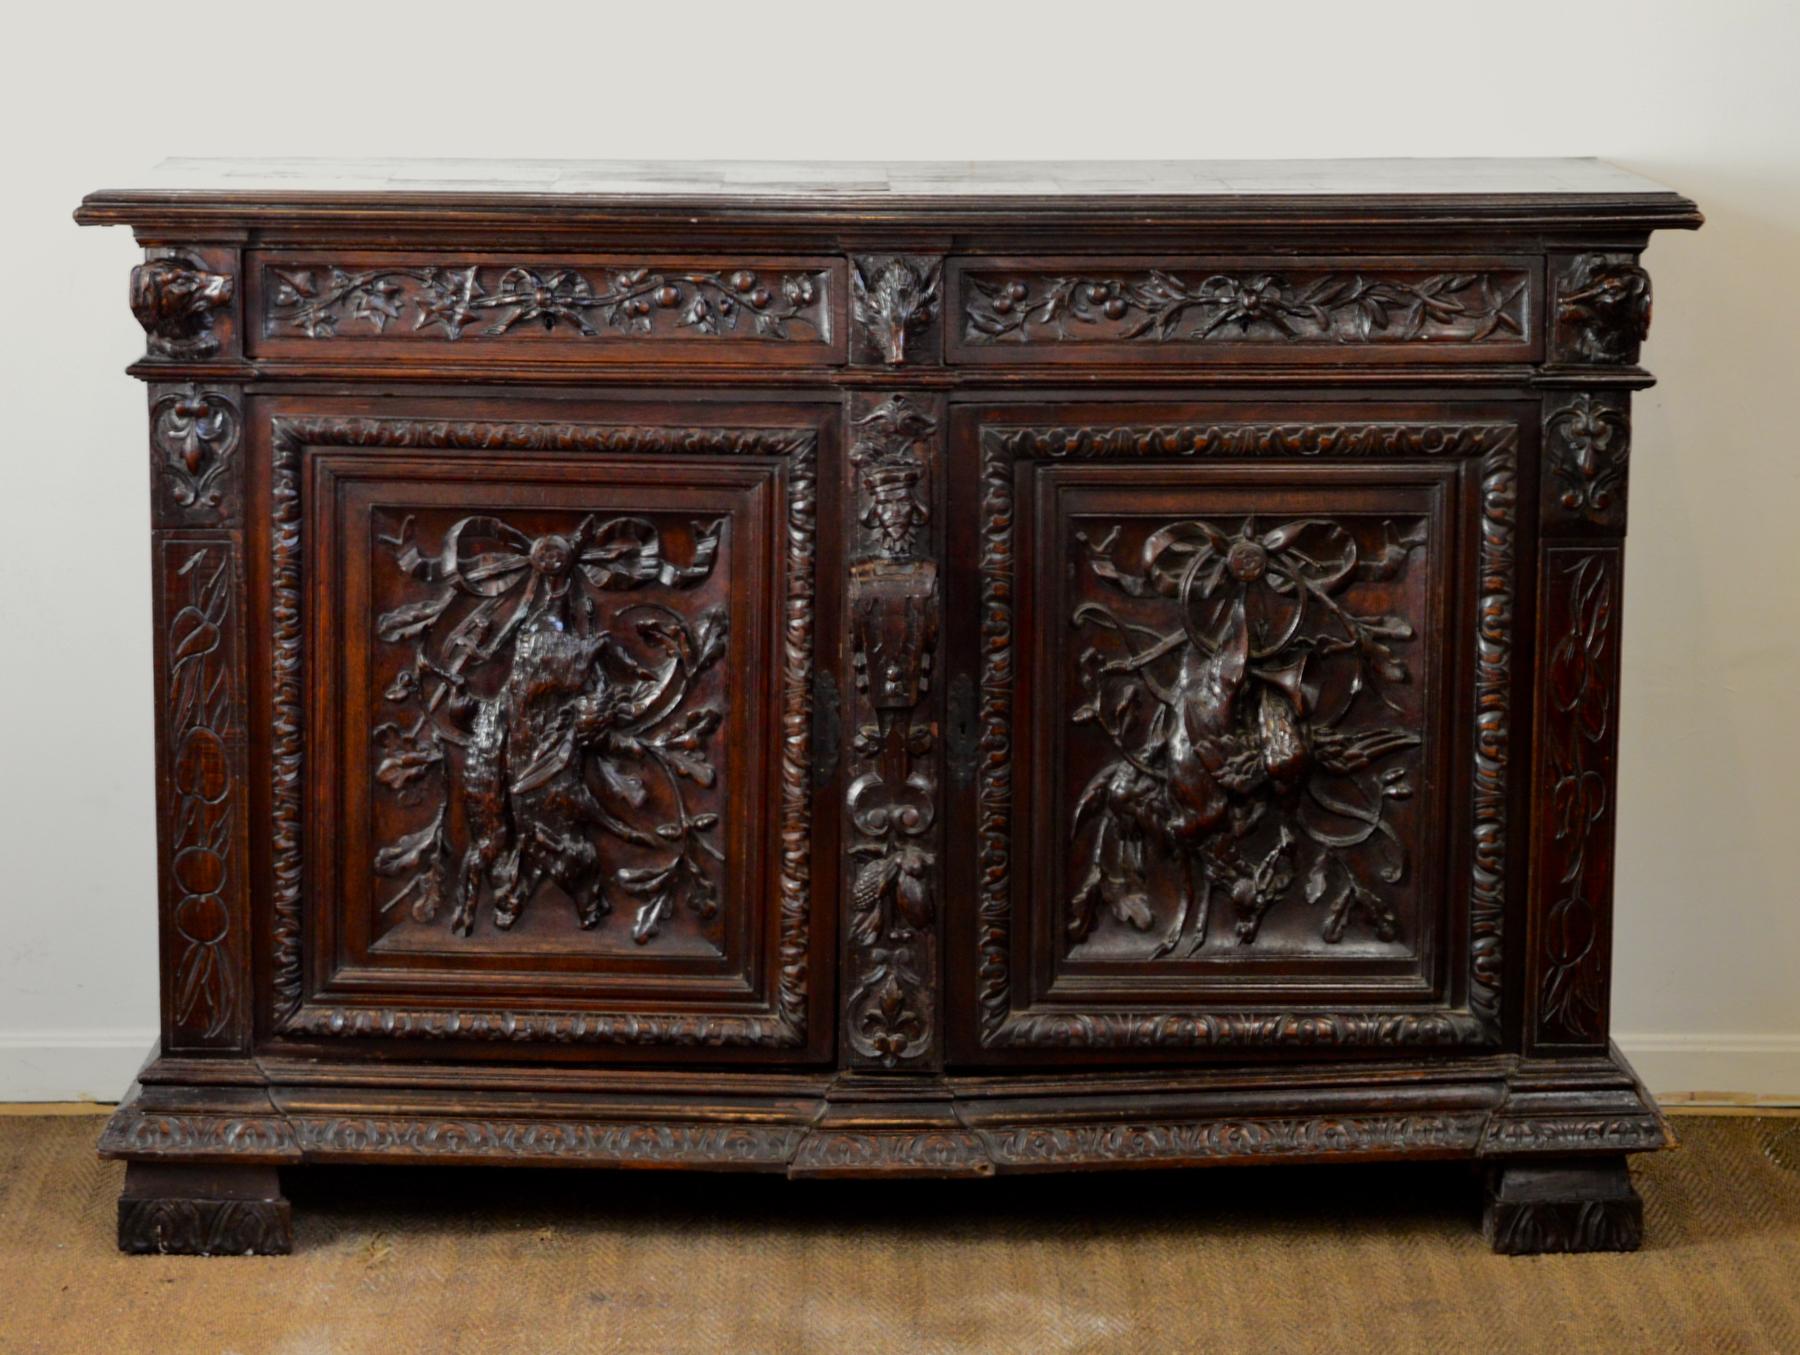 Perhaps you chase foxes. Race old cars. Whatever gives you chase and drives you towards a sporting life, so be it. Make sure you serve upon a buffet that is worthy of your catch. This late 19th century Black Forest styled sideboard would be a fine